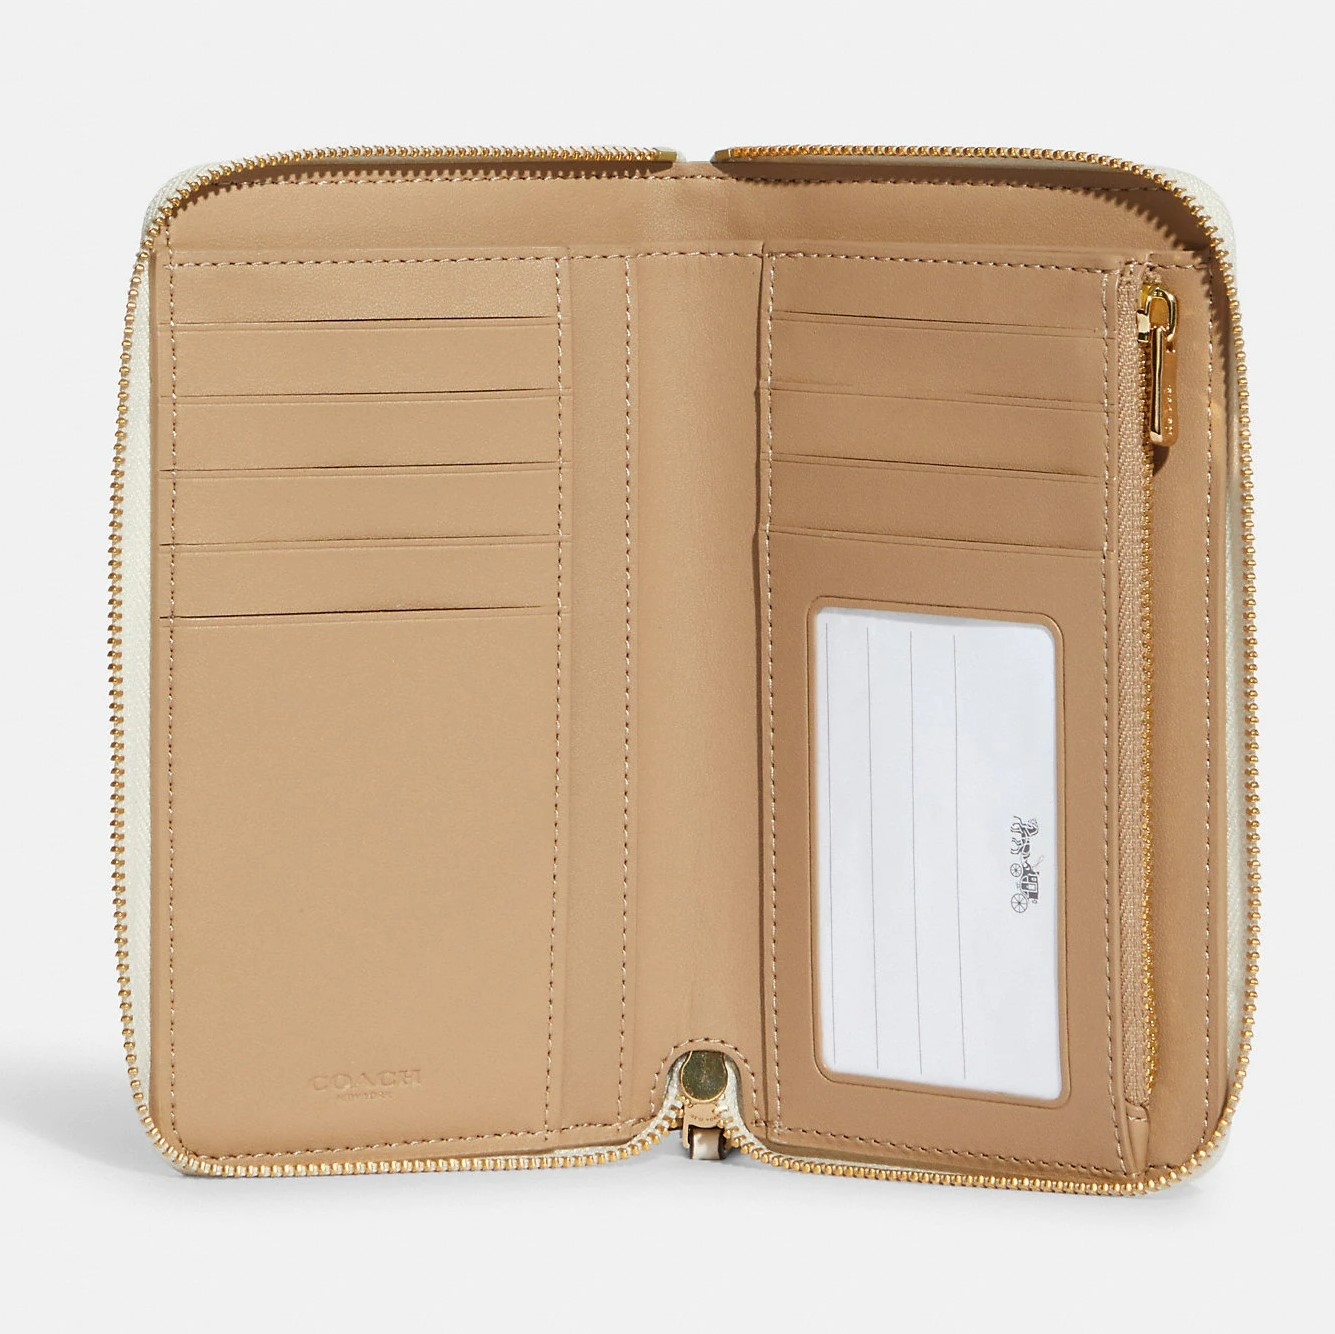 VÍ DÀI NỮ WHITE COACH MEDIUM ID ZIP WALLET WITH DIARY EMBROIDERY 1